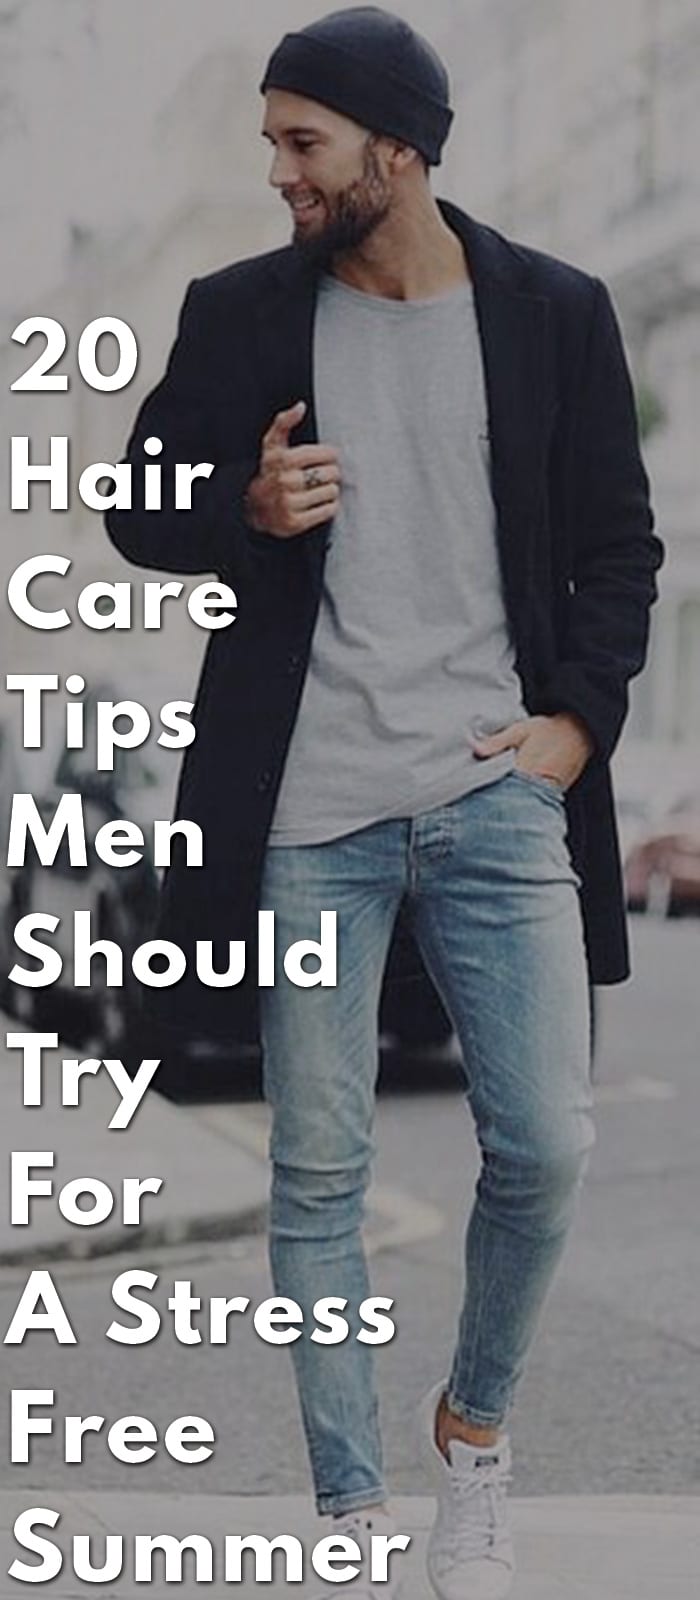 20-Hair-Care-Tips-Men-Should-Try-For-A-Stress-Free-Summer